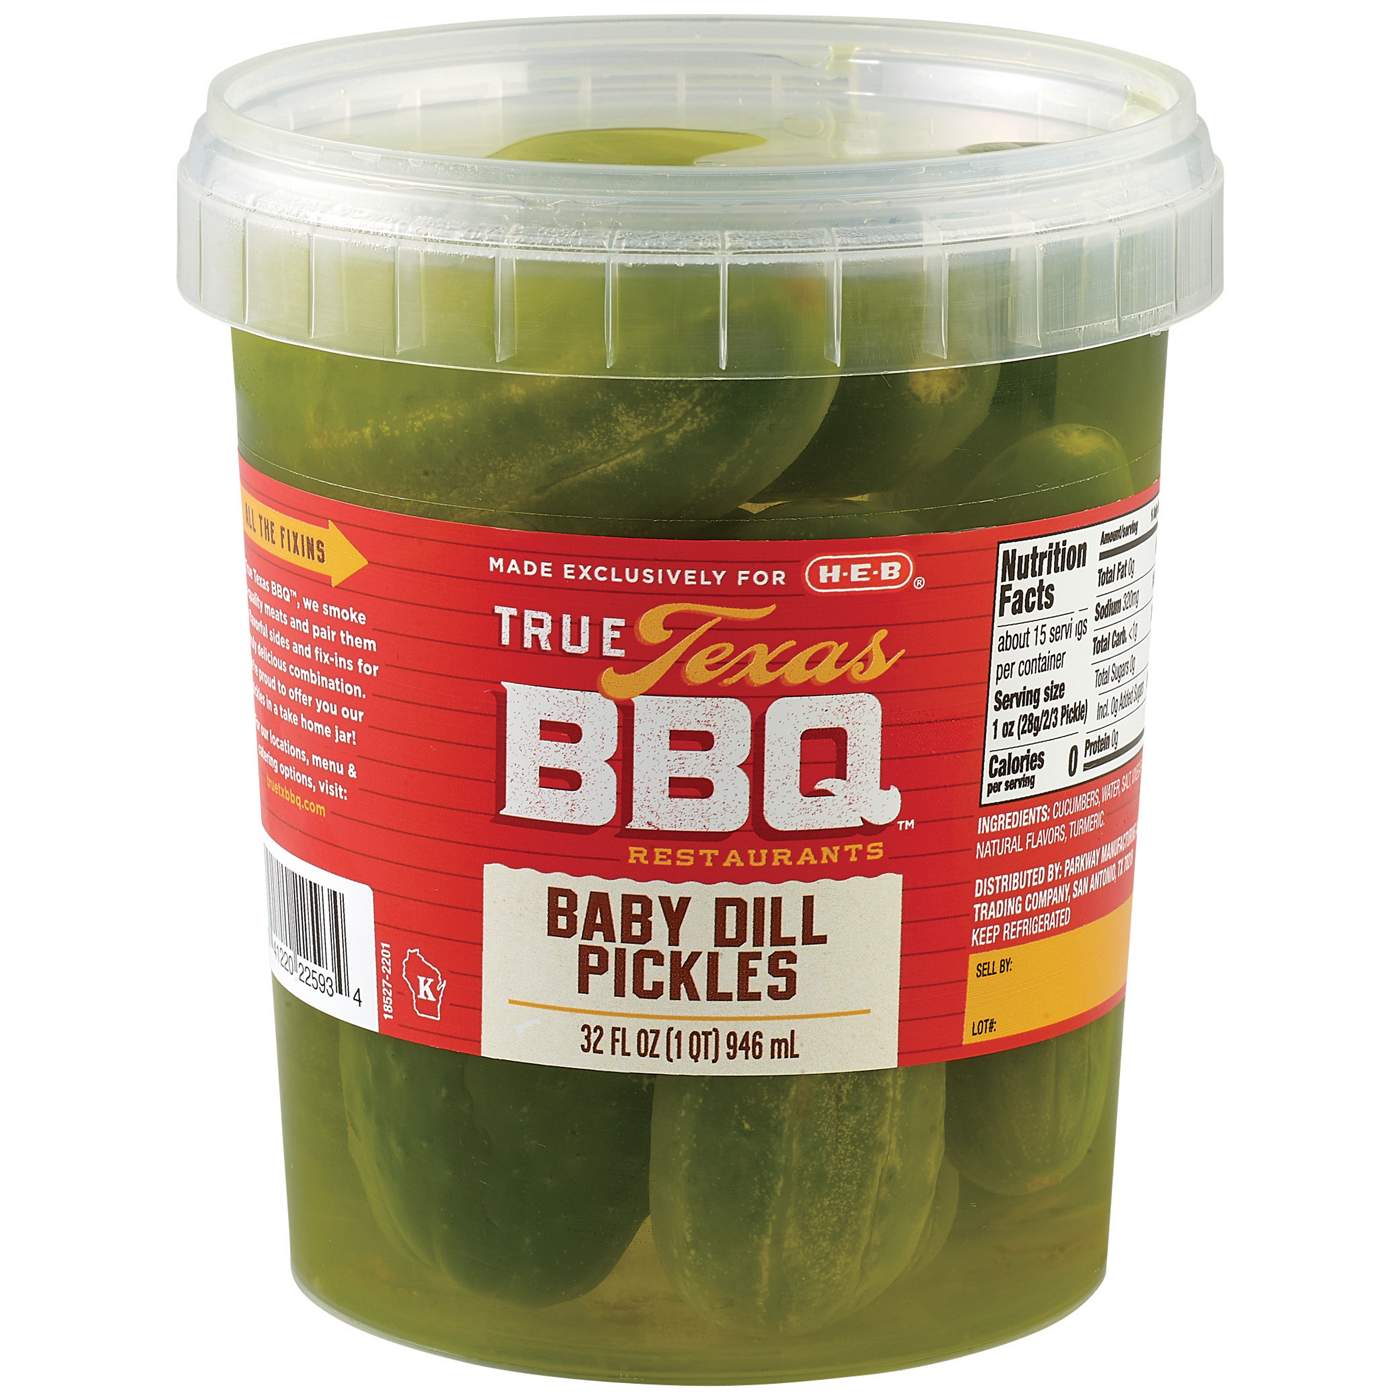 True Texas BBQ Baby Dill Pickles; image 1 of 2